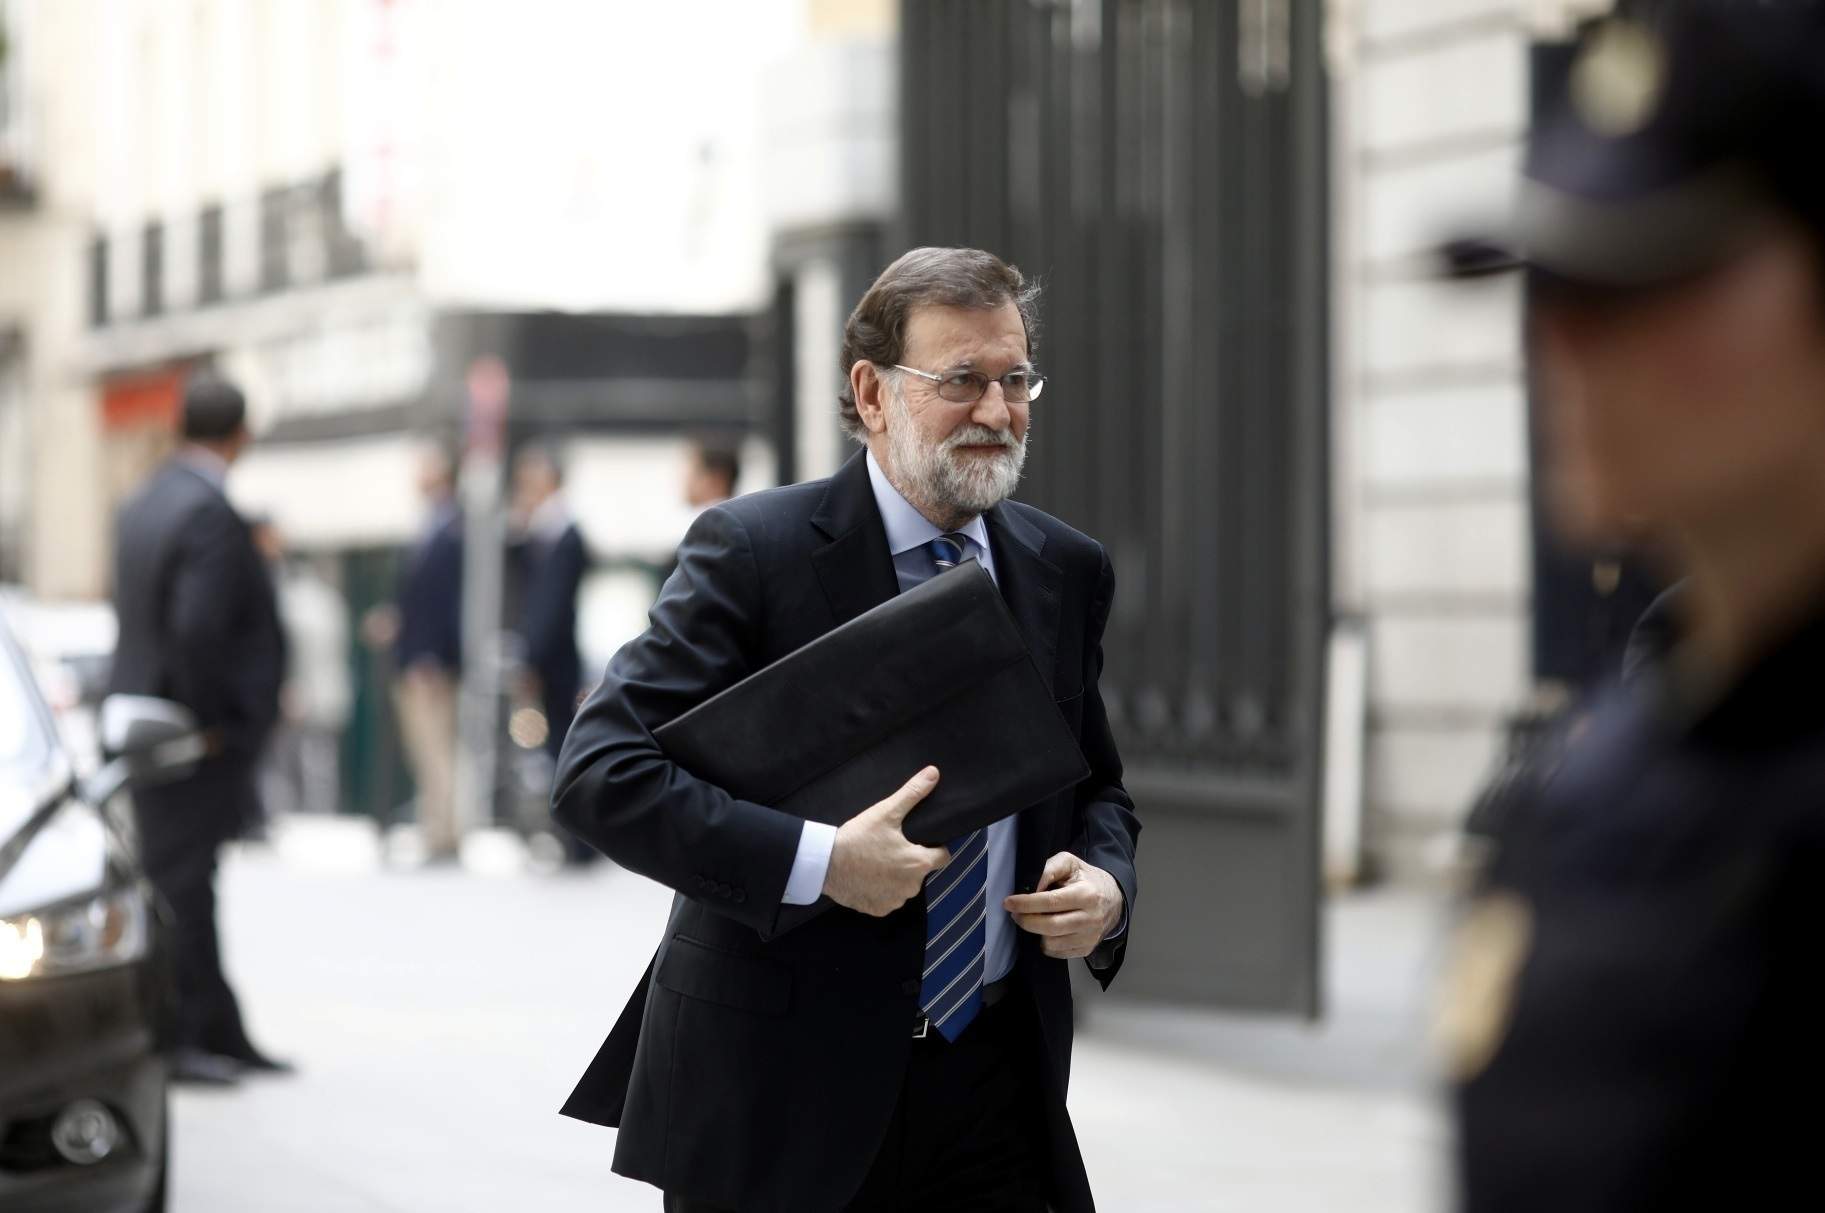 The document that shows that Mariano Rajoy knew about Operation Catalonia by October 2012